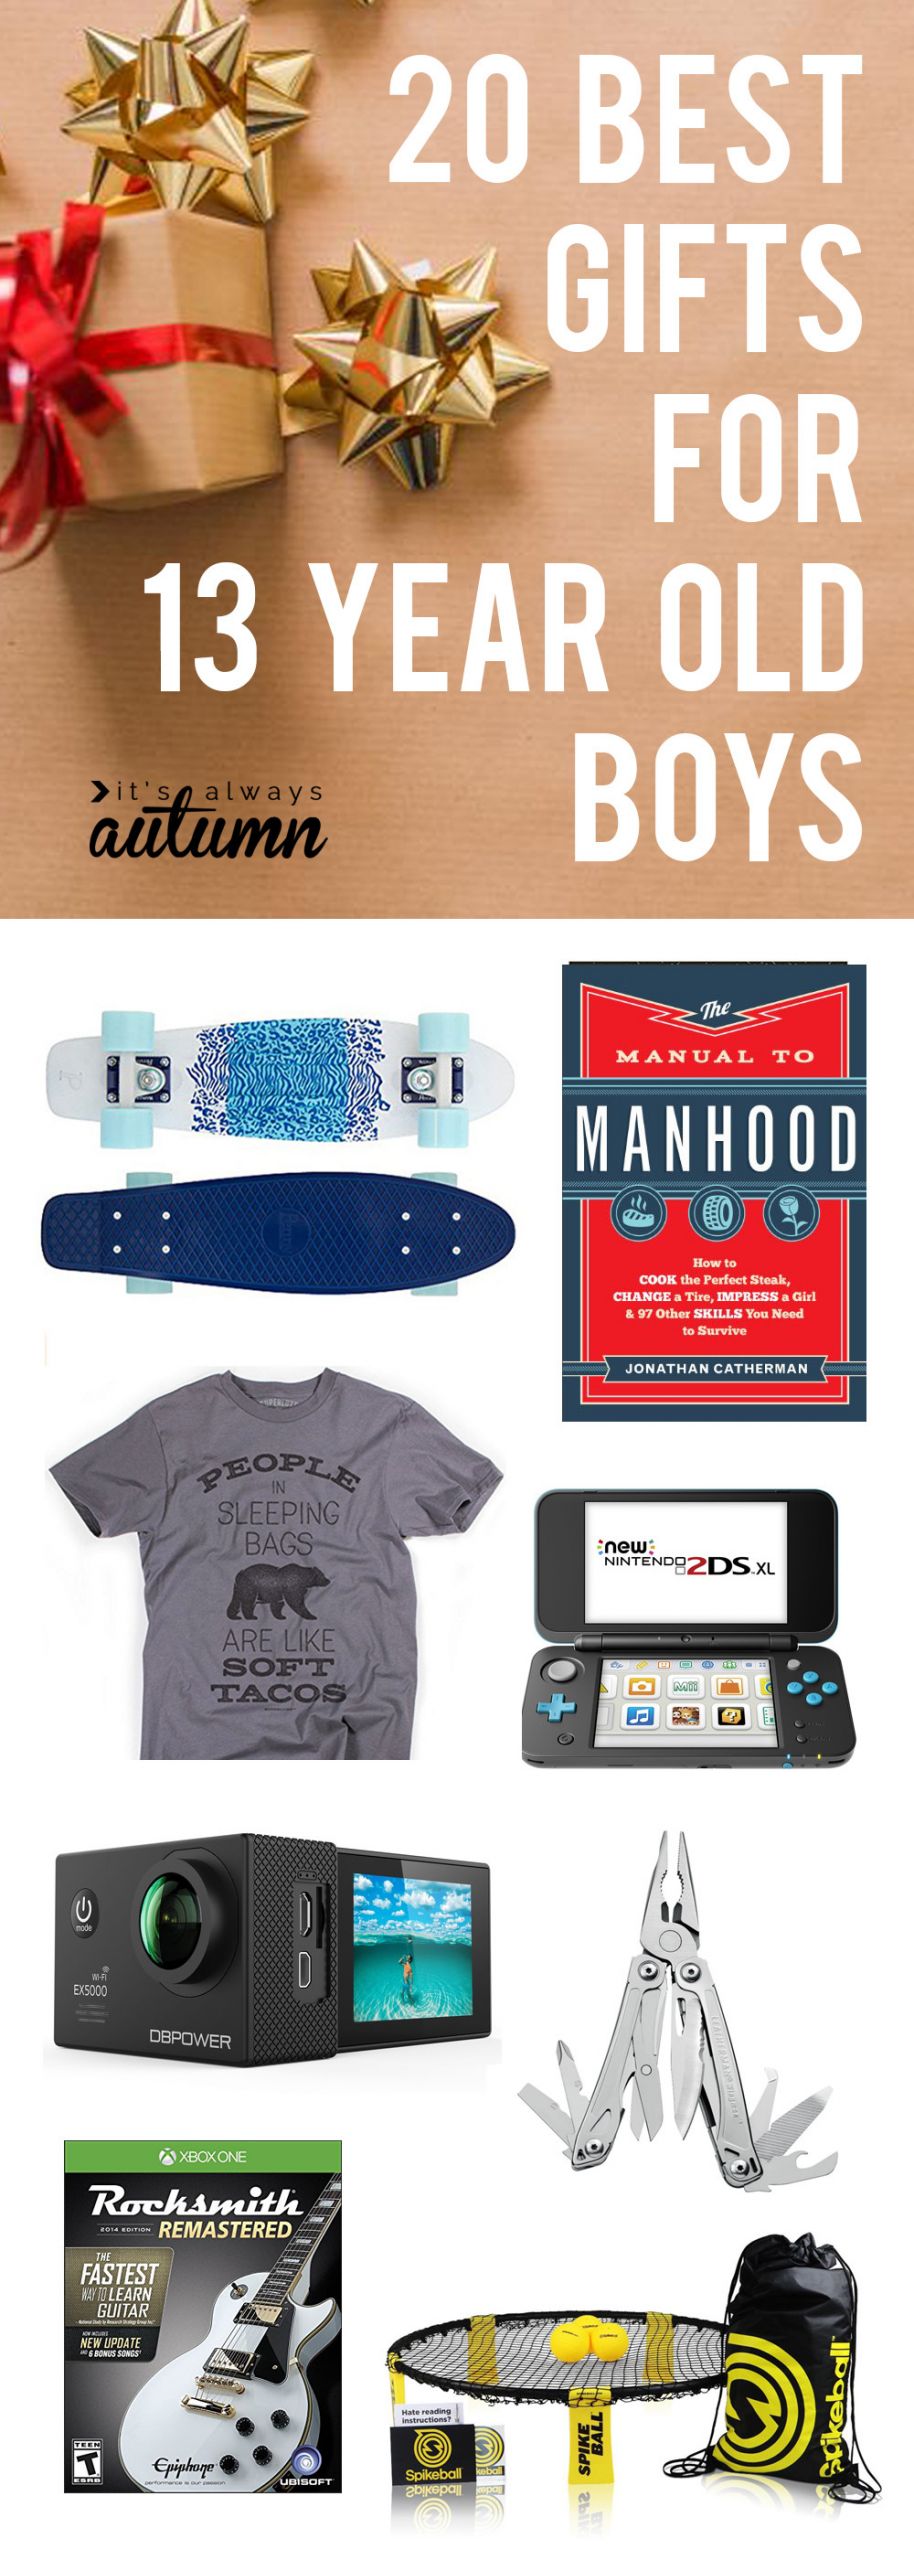 Best Gift Ideas For Boys
 The 23 Best Ideas for Gift Ideas for Boys Age 16 Best